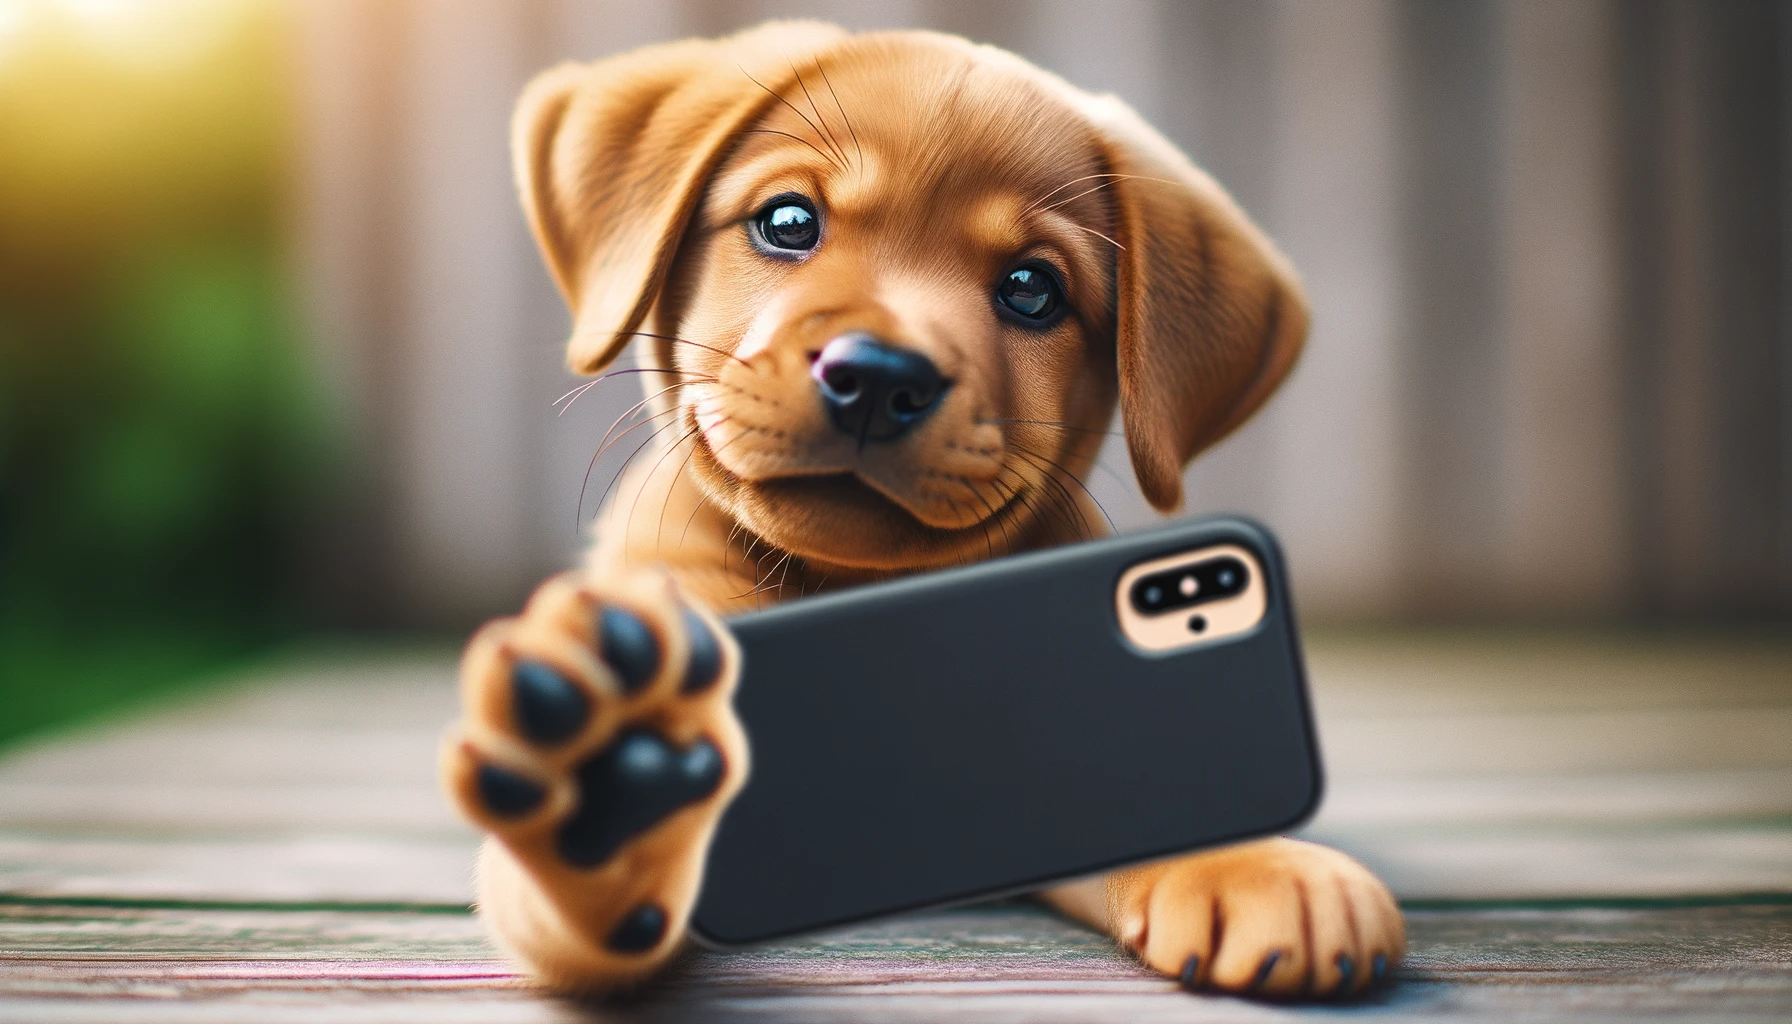 An adorable Labrottie Puppy taking a selfie with its cute floppy ears and warm eyes